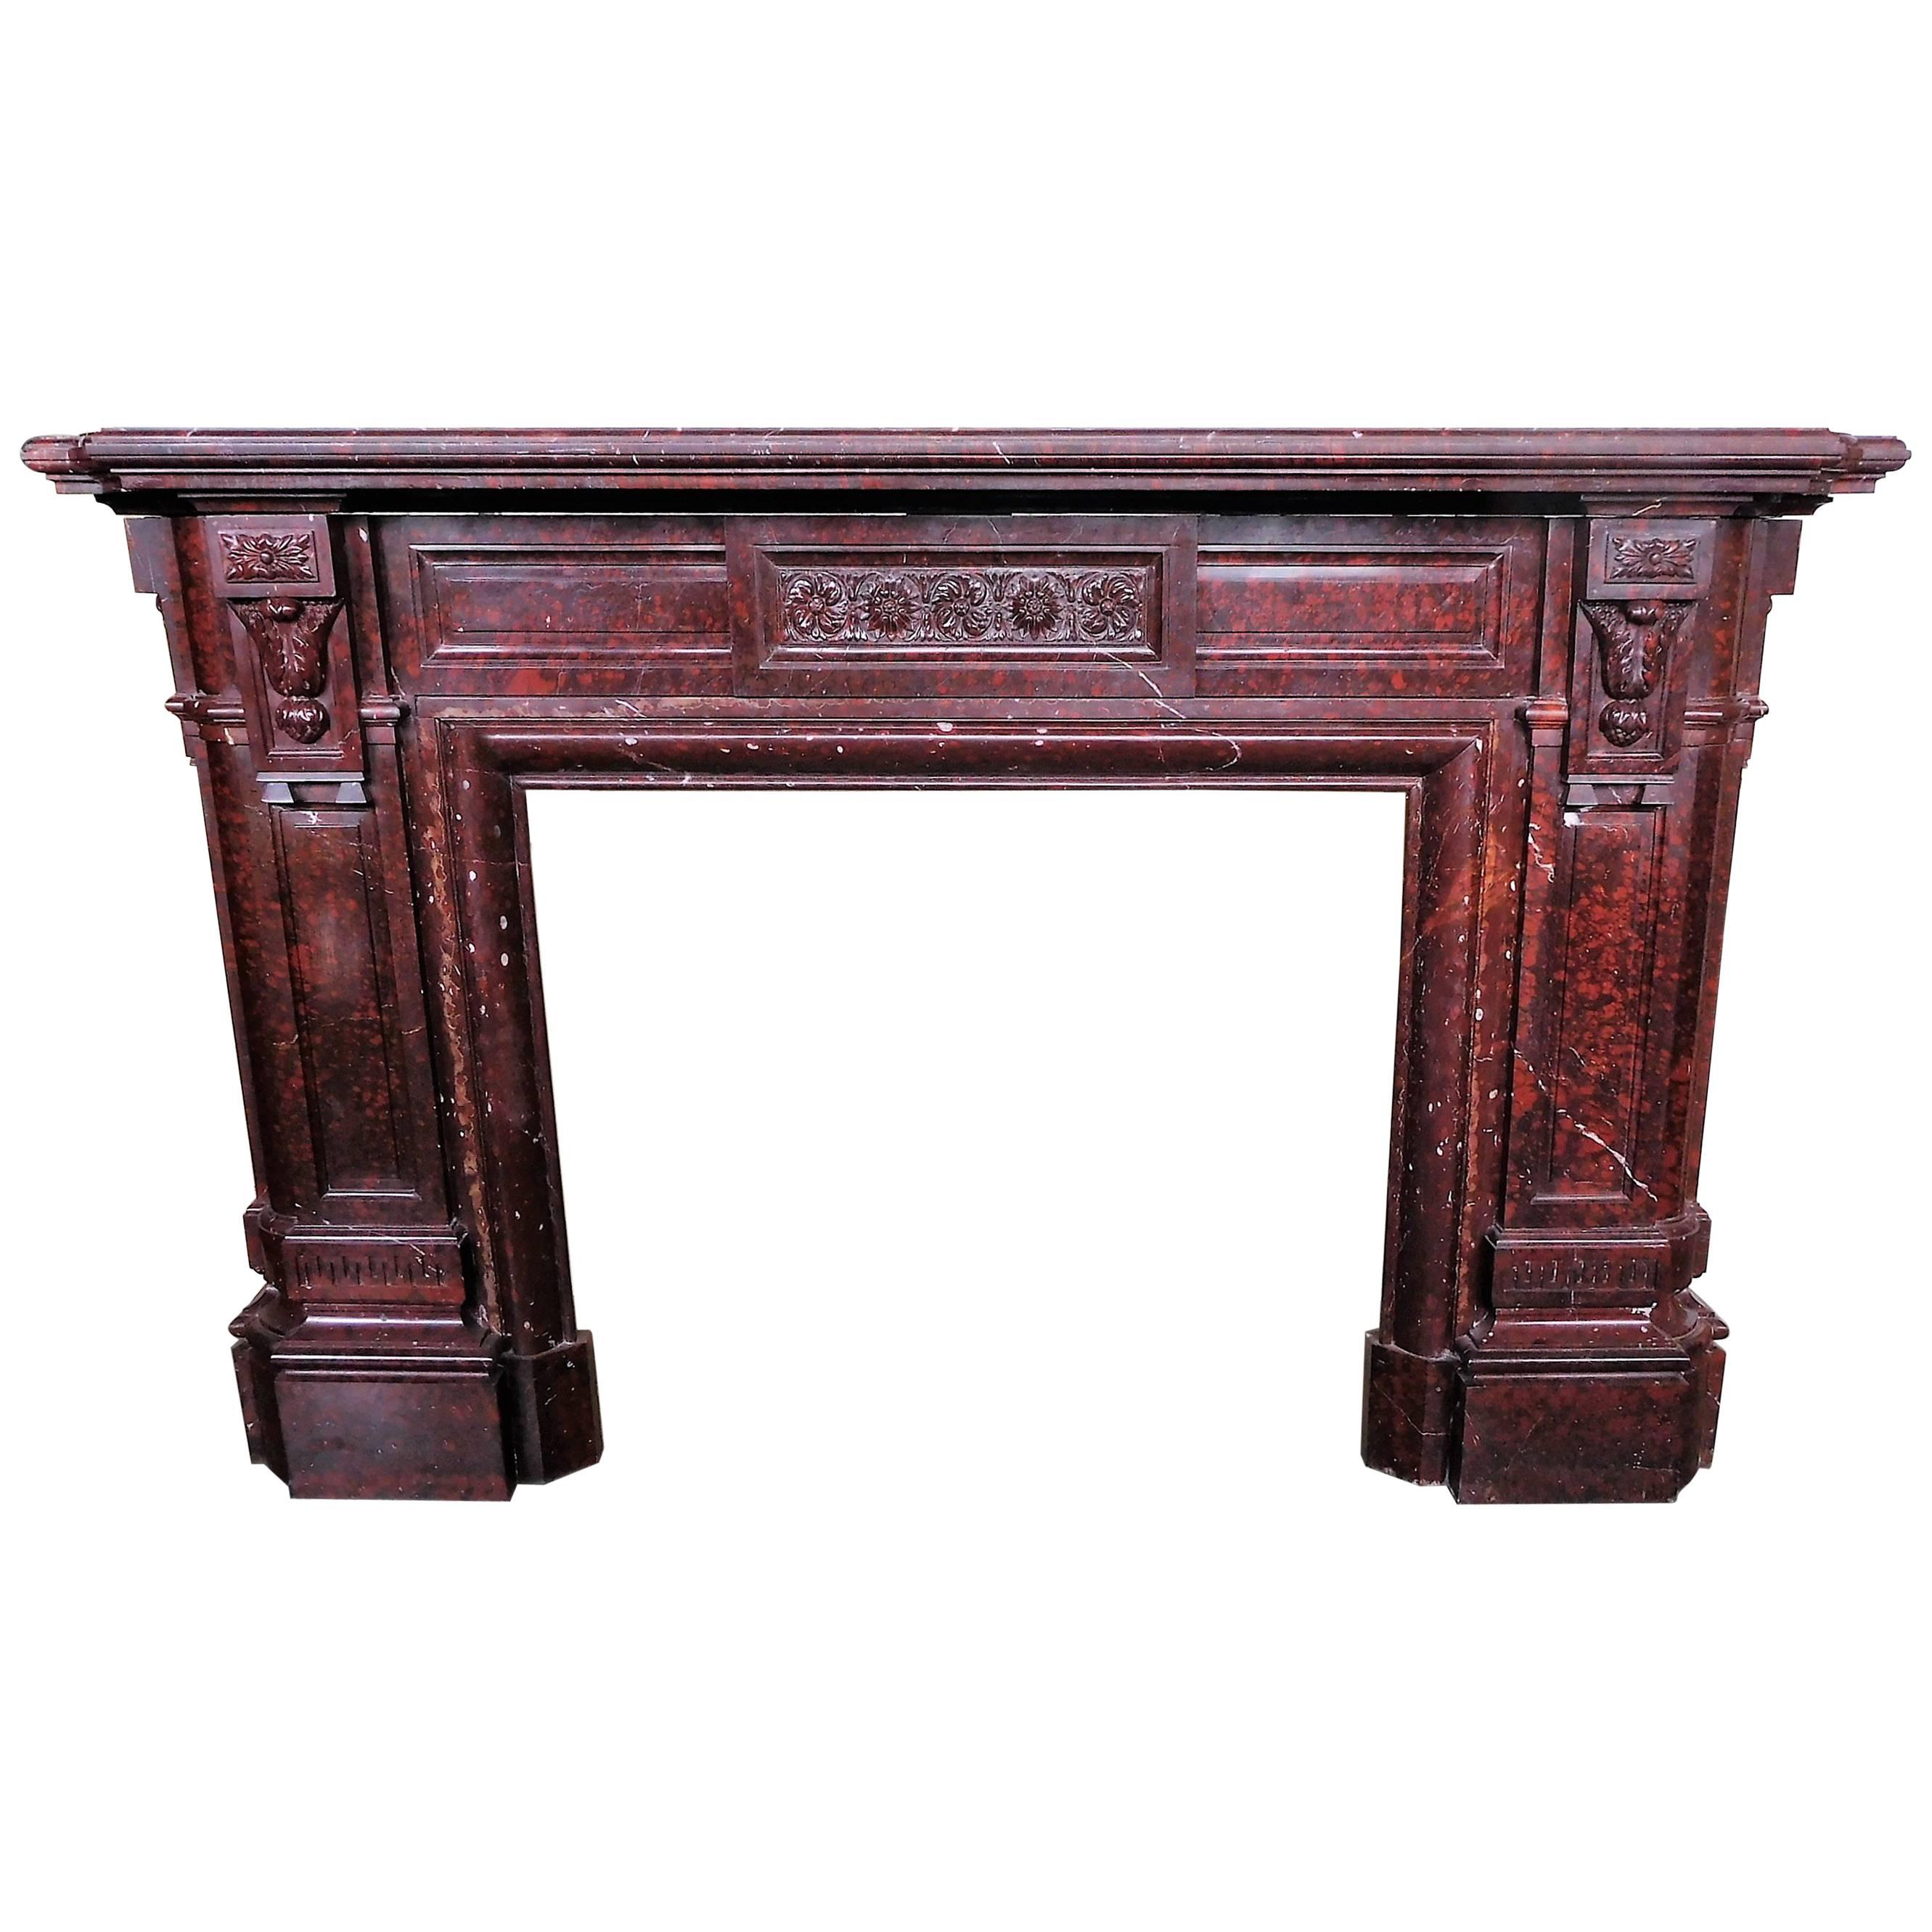 ANTIQUE FIREPLACE Red Griotte Marble For Sale